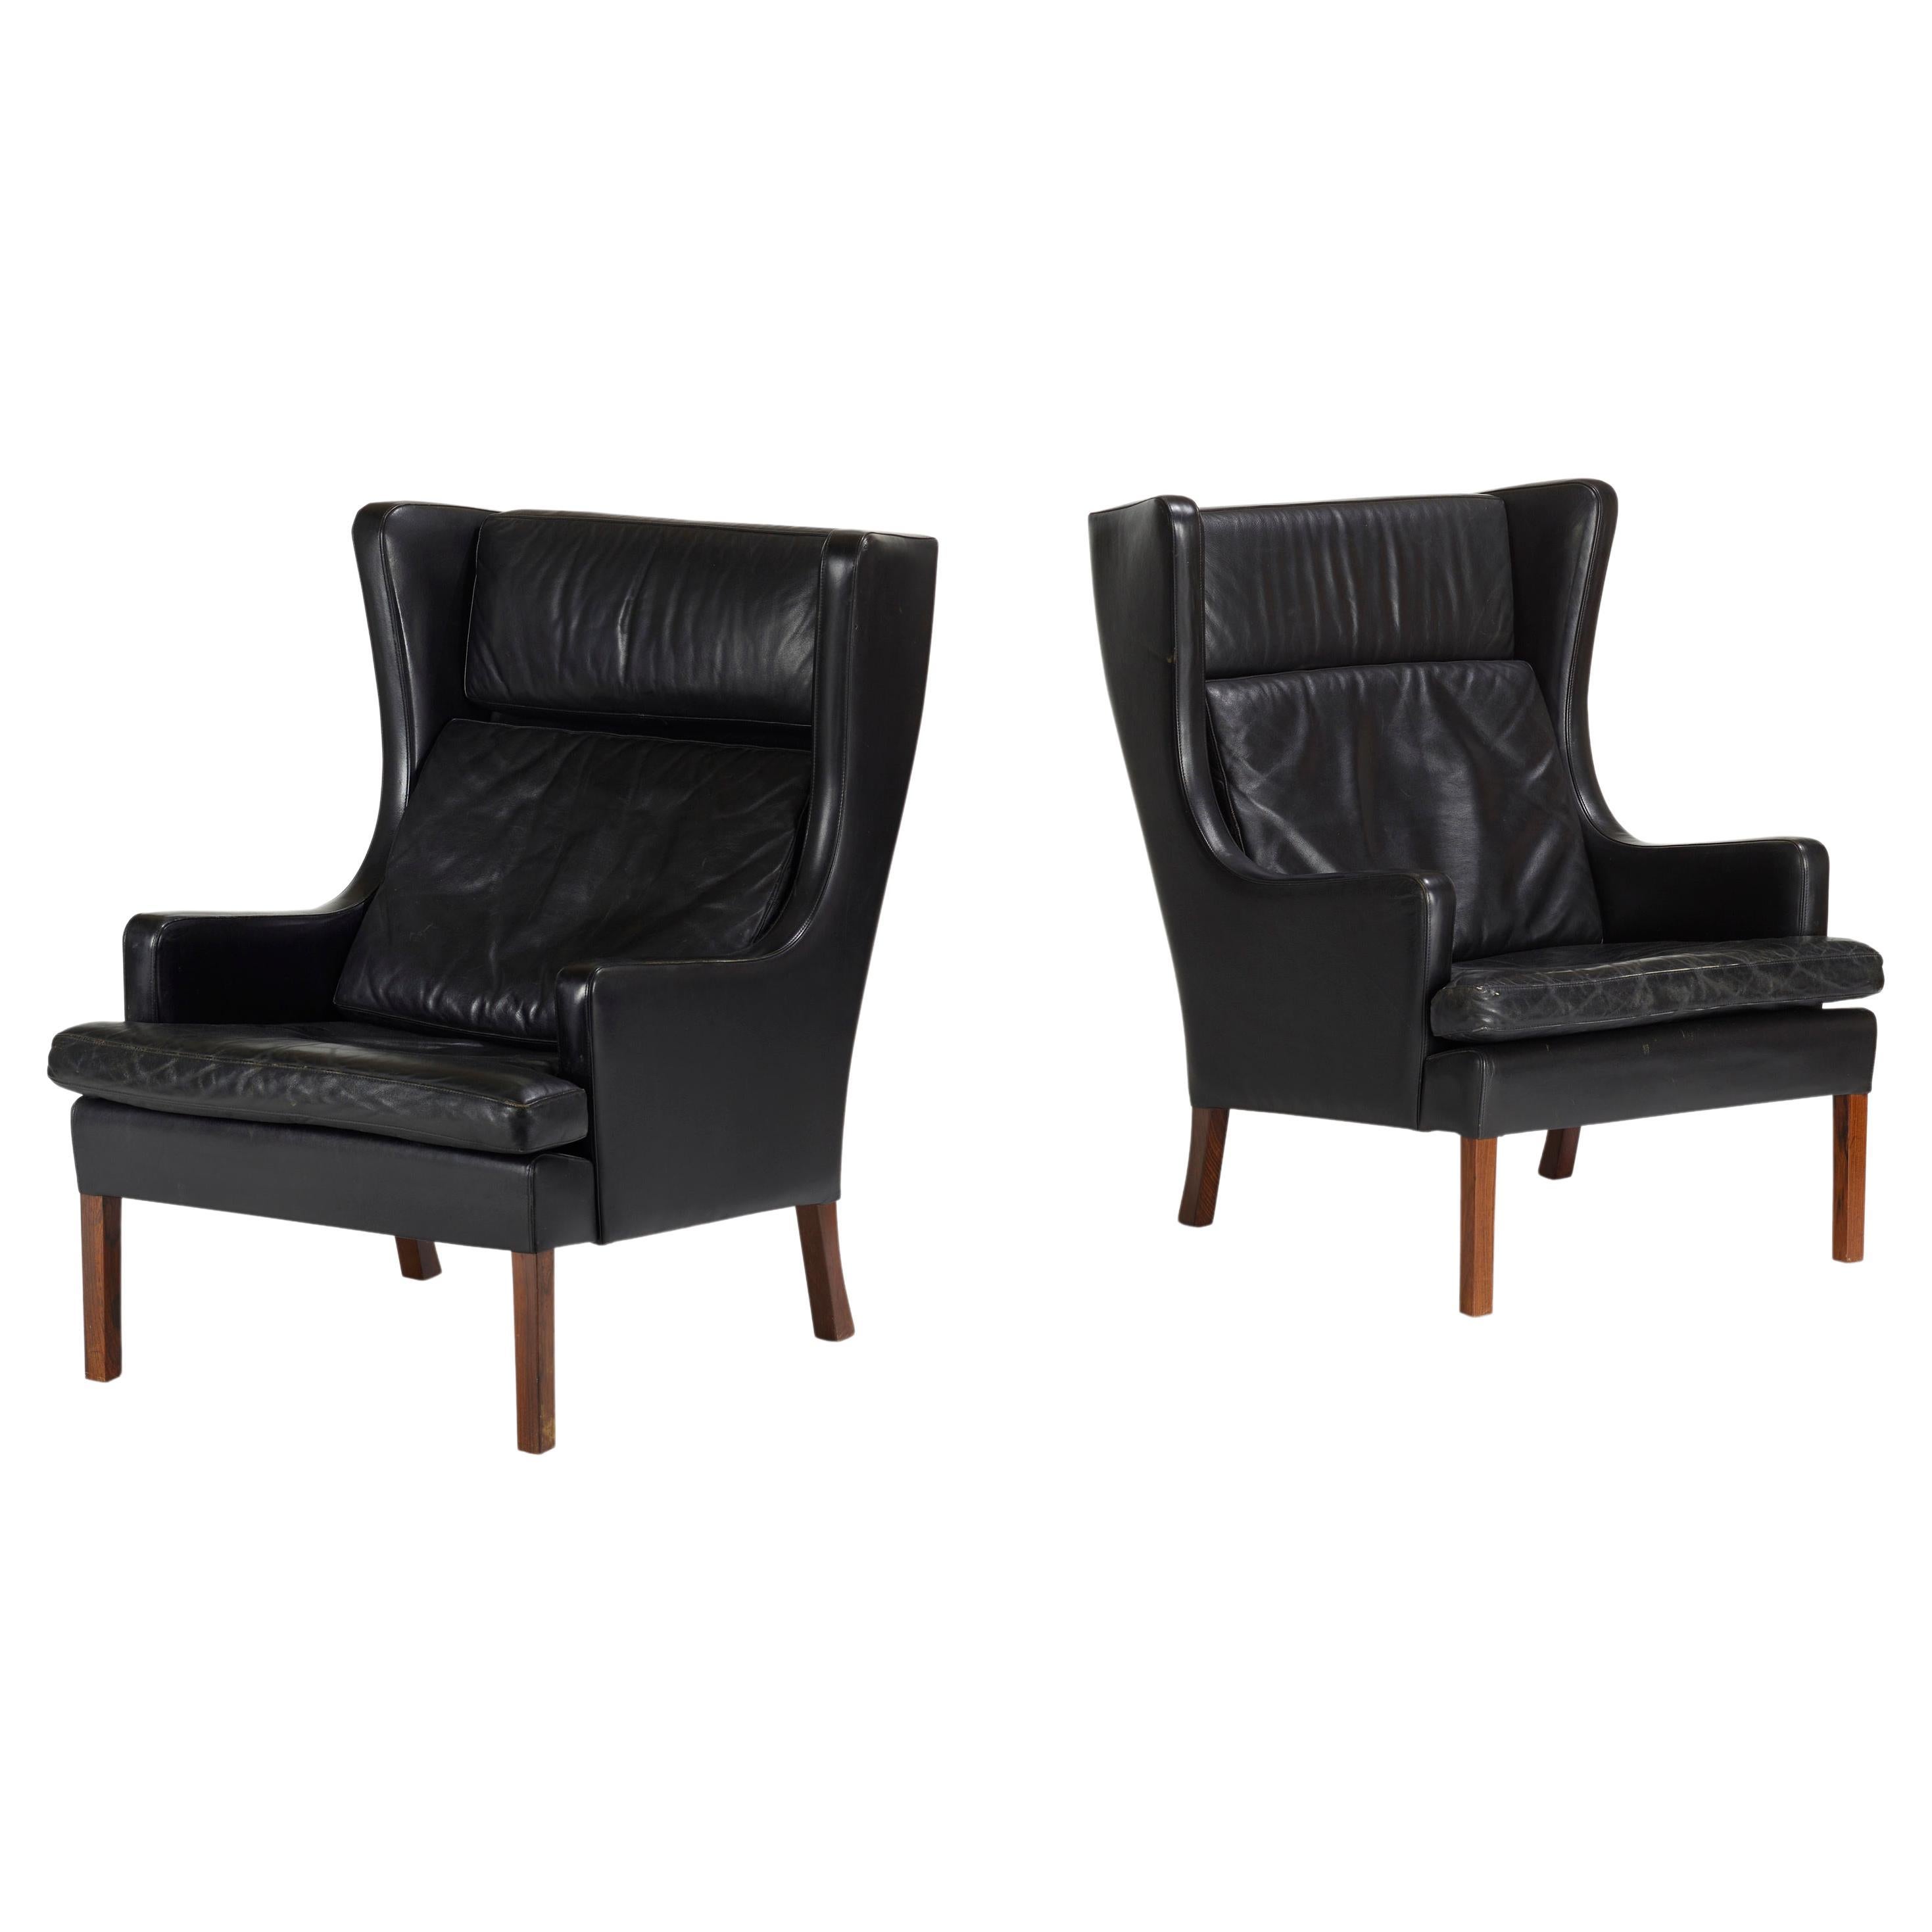 Pair of Danish Black Leather Upholstered Wingback Chairs For Sale